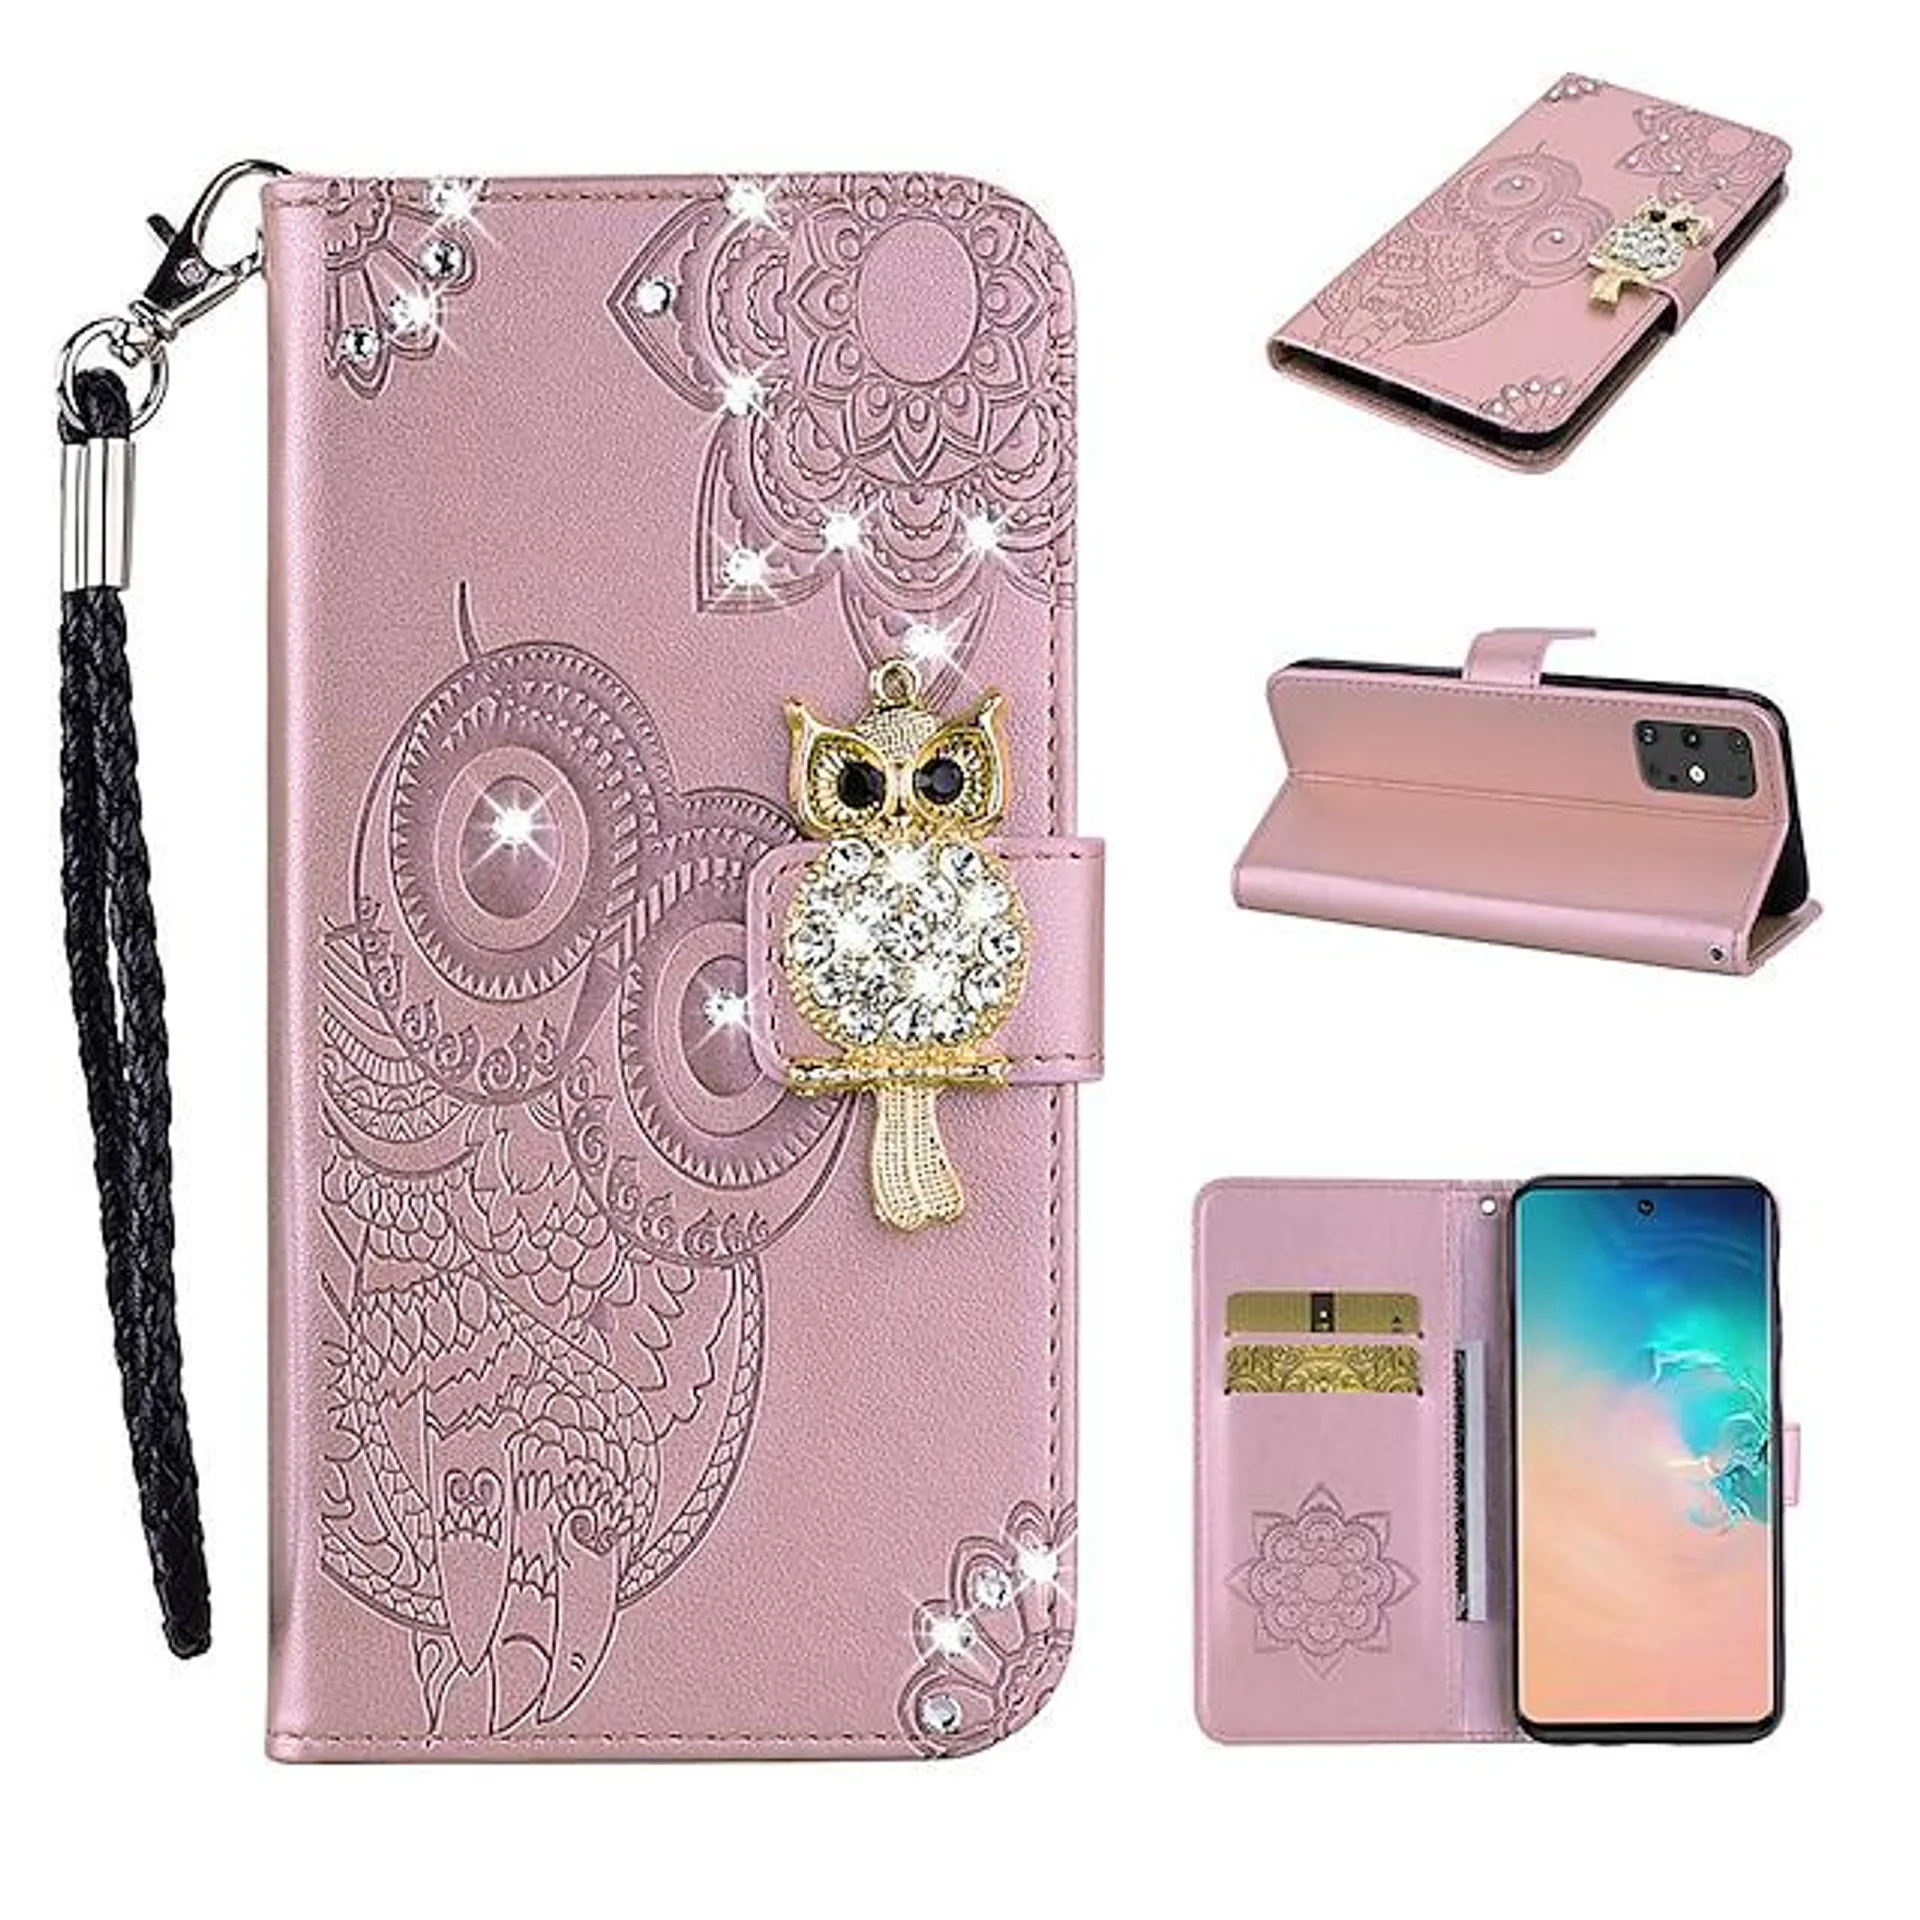 Phone Case For Samsung Galaxy S23 S22 S21 S20 Plus Ultra A73 A53 A33 A72 A52 A42 with Stand Card Holder Rhinestone Animal PU Leather